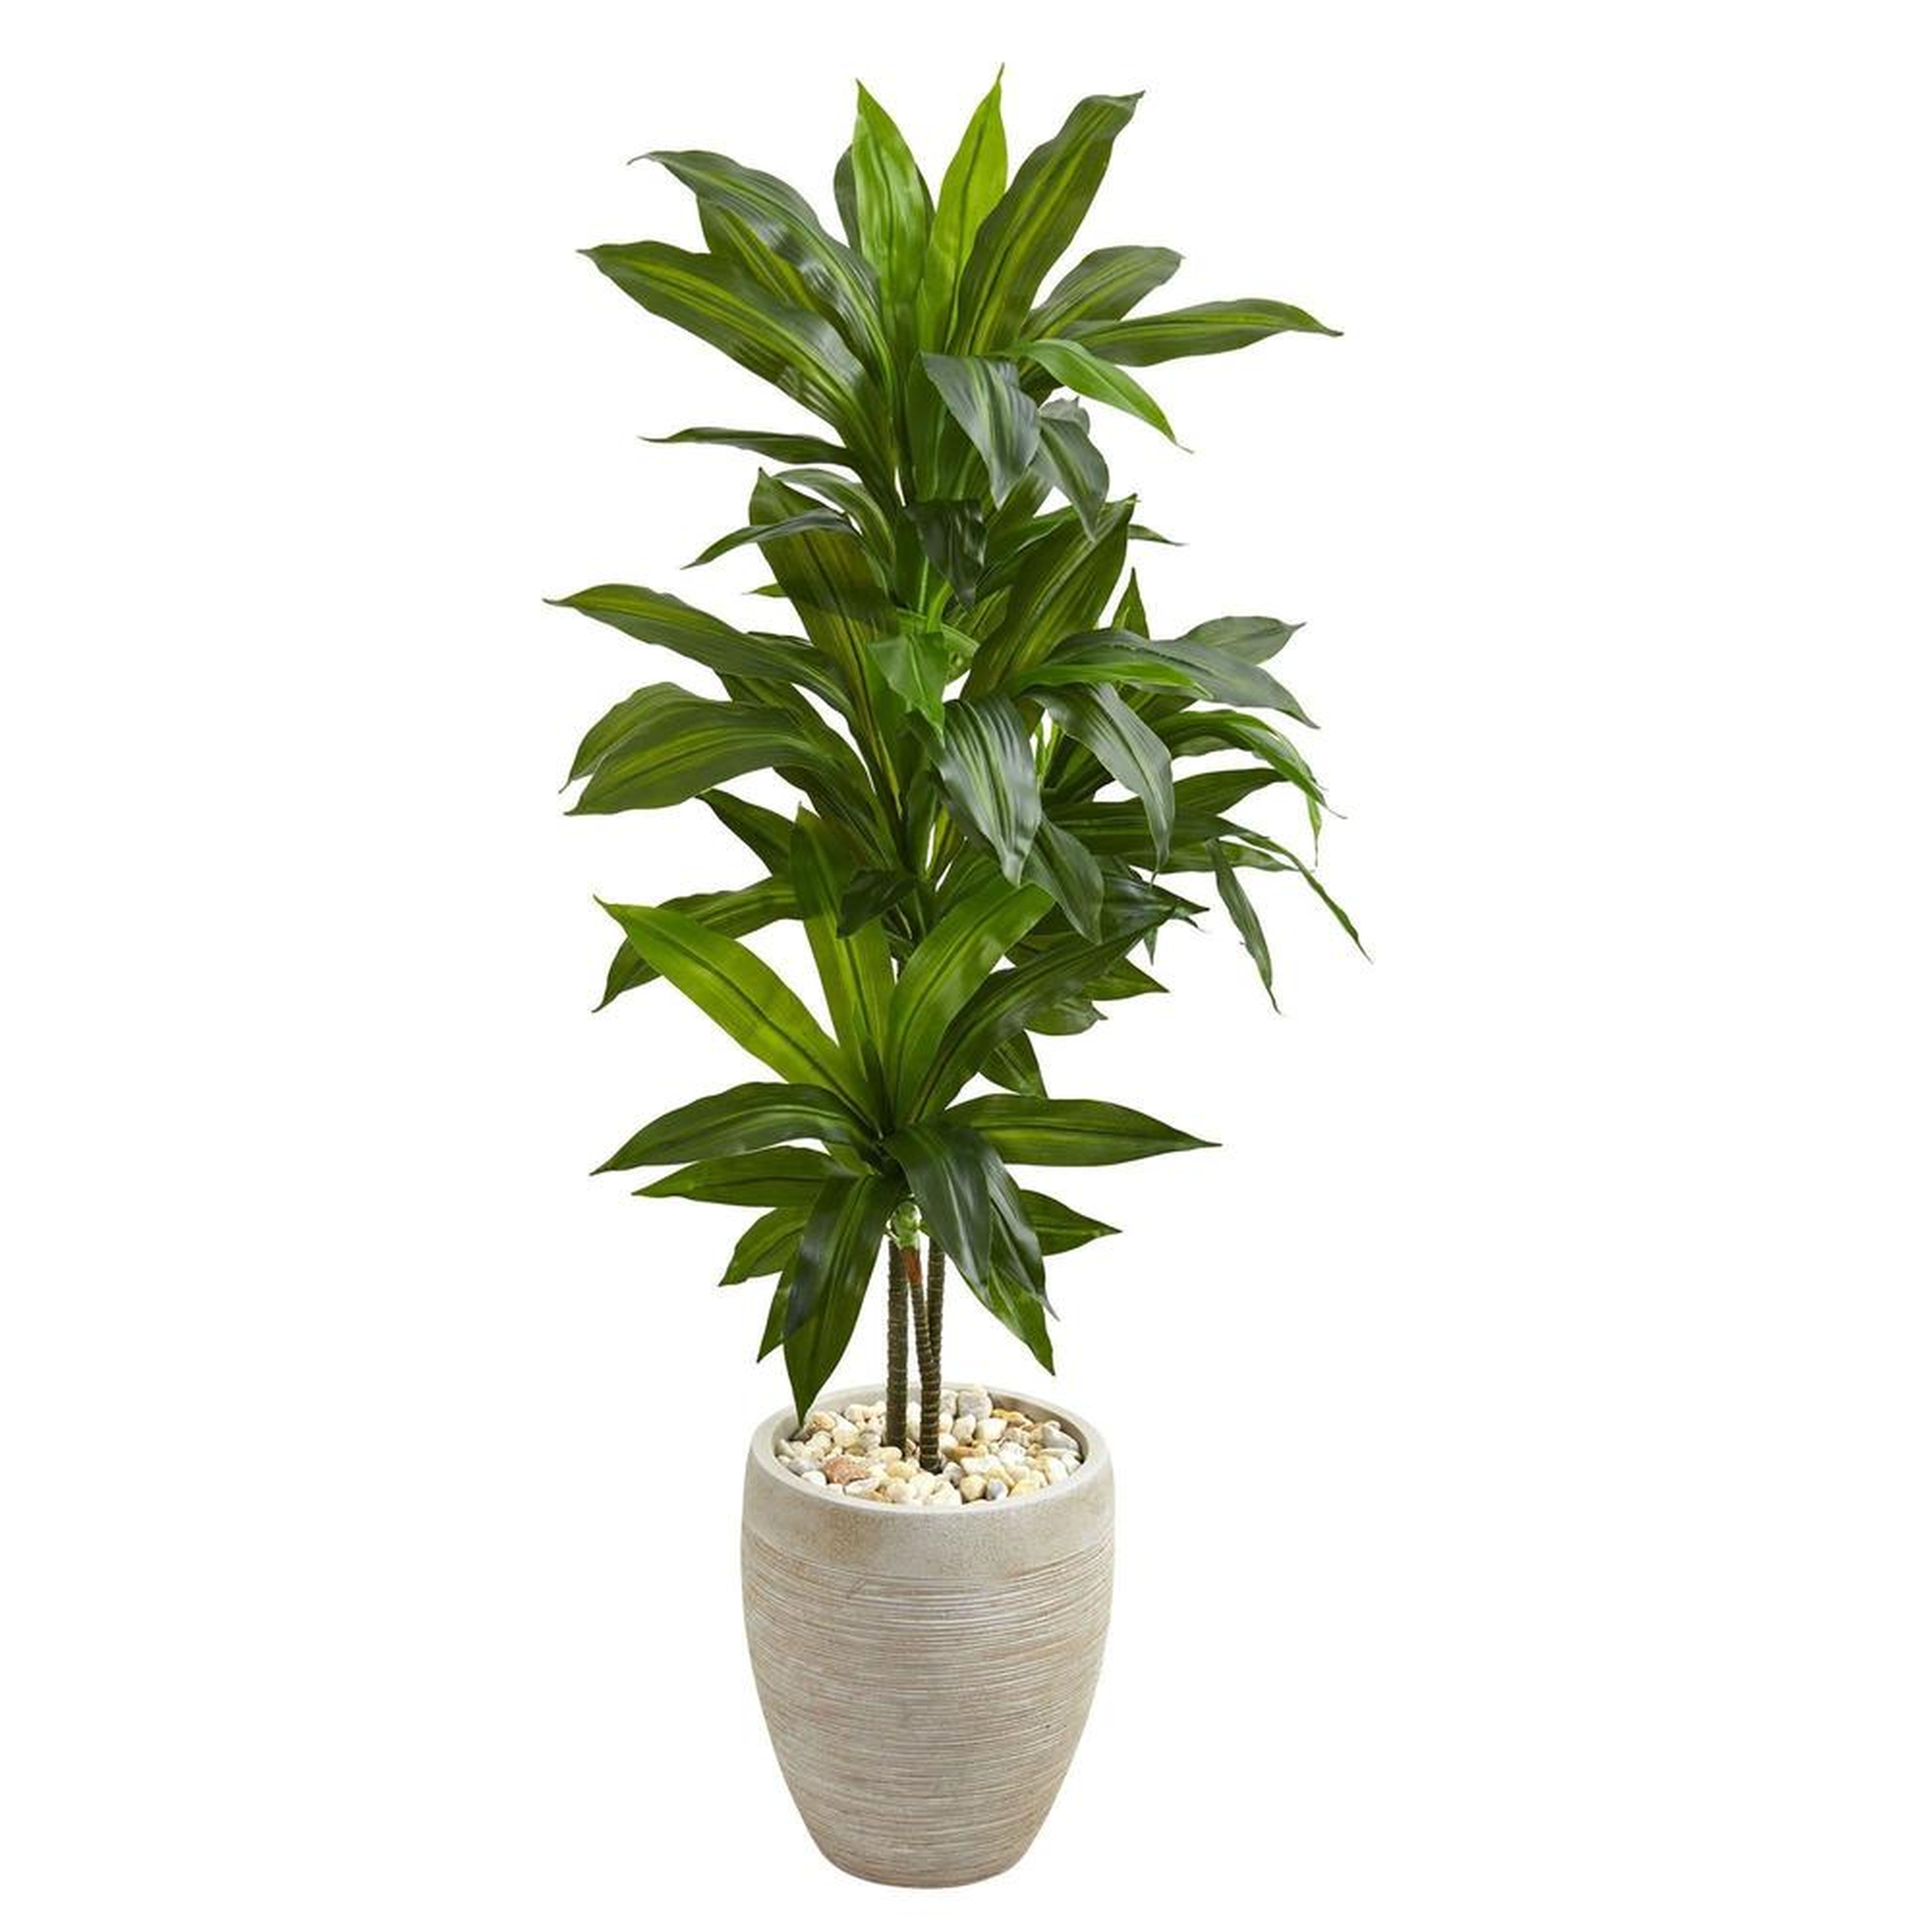 4’ Dracaena Artificial Plant in Sand Colored Planter (Real Touch) - Fiddle + Bloom